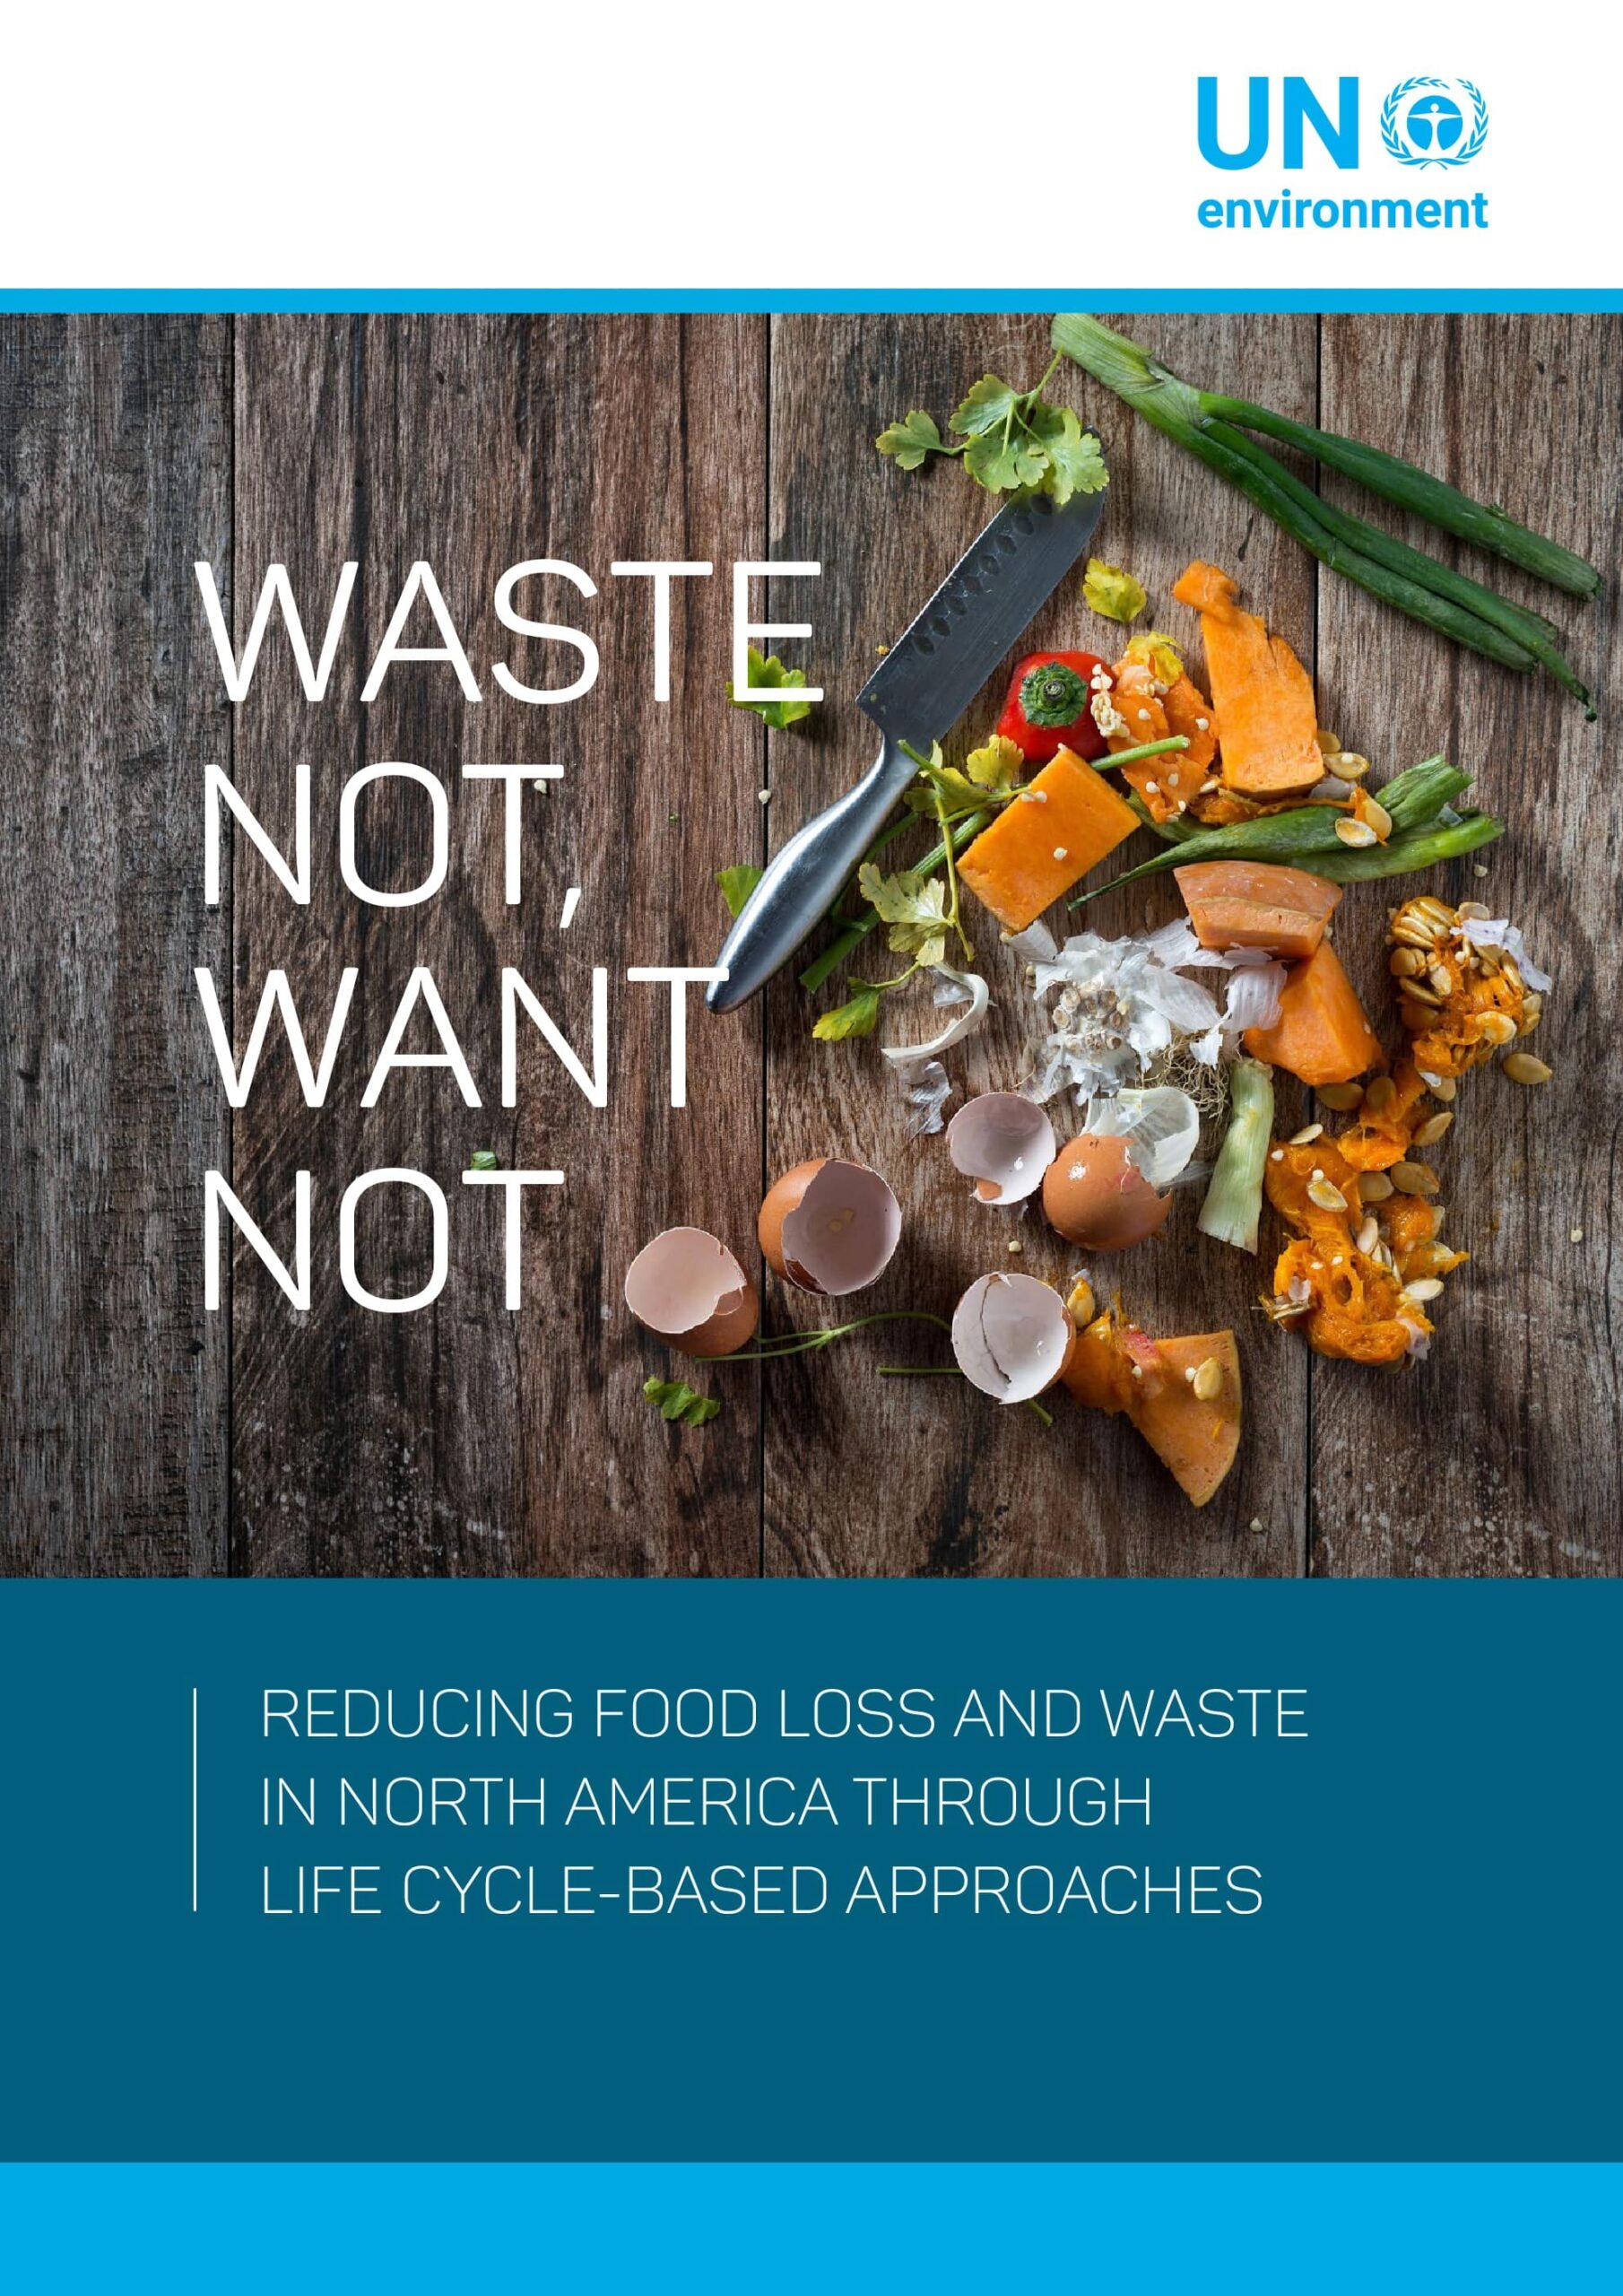 Community Resources to Combat Climate Change and Food Loss and Waste